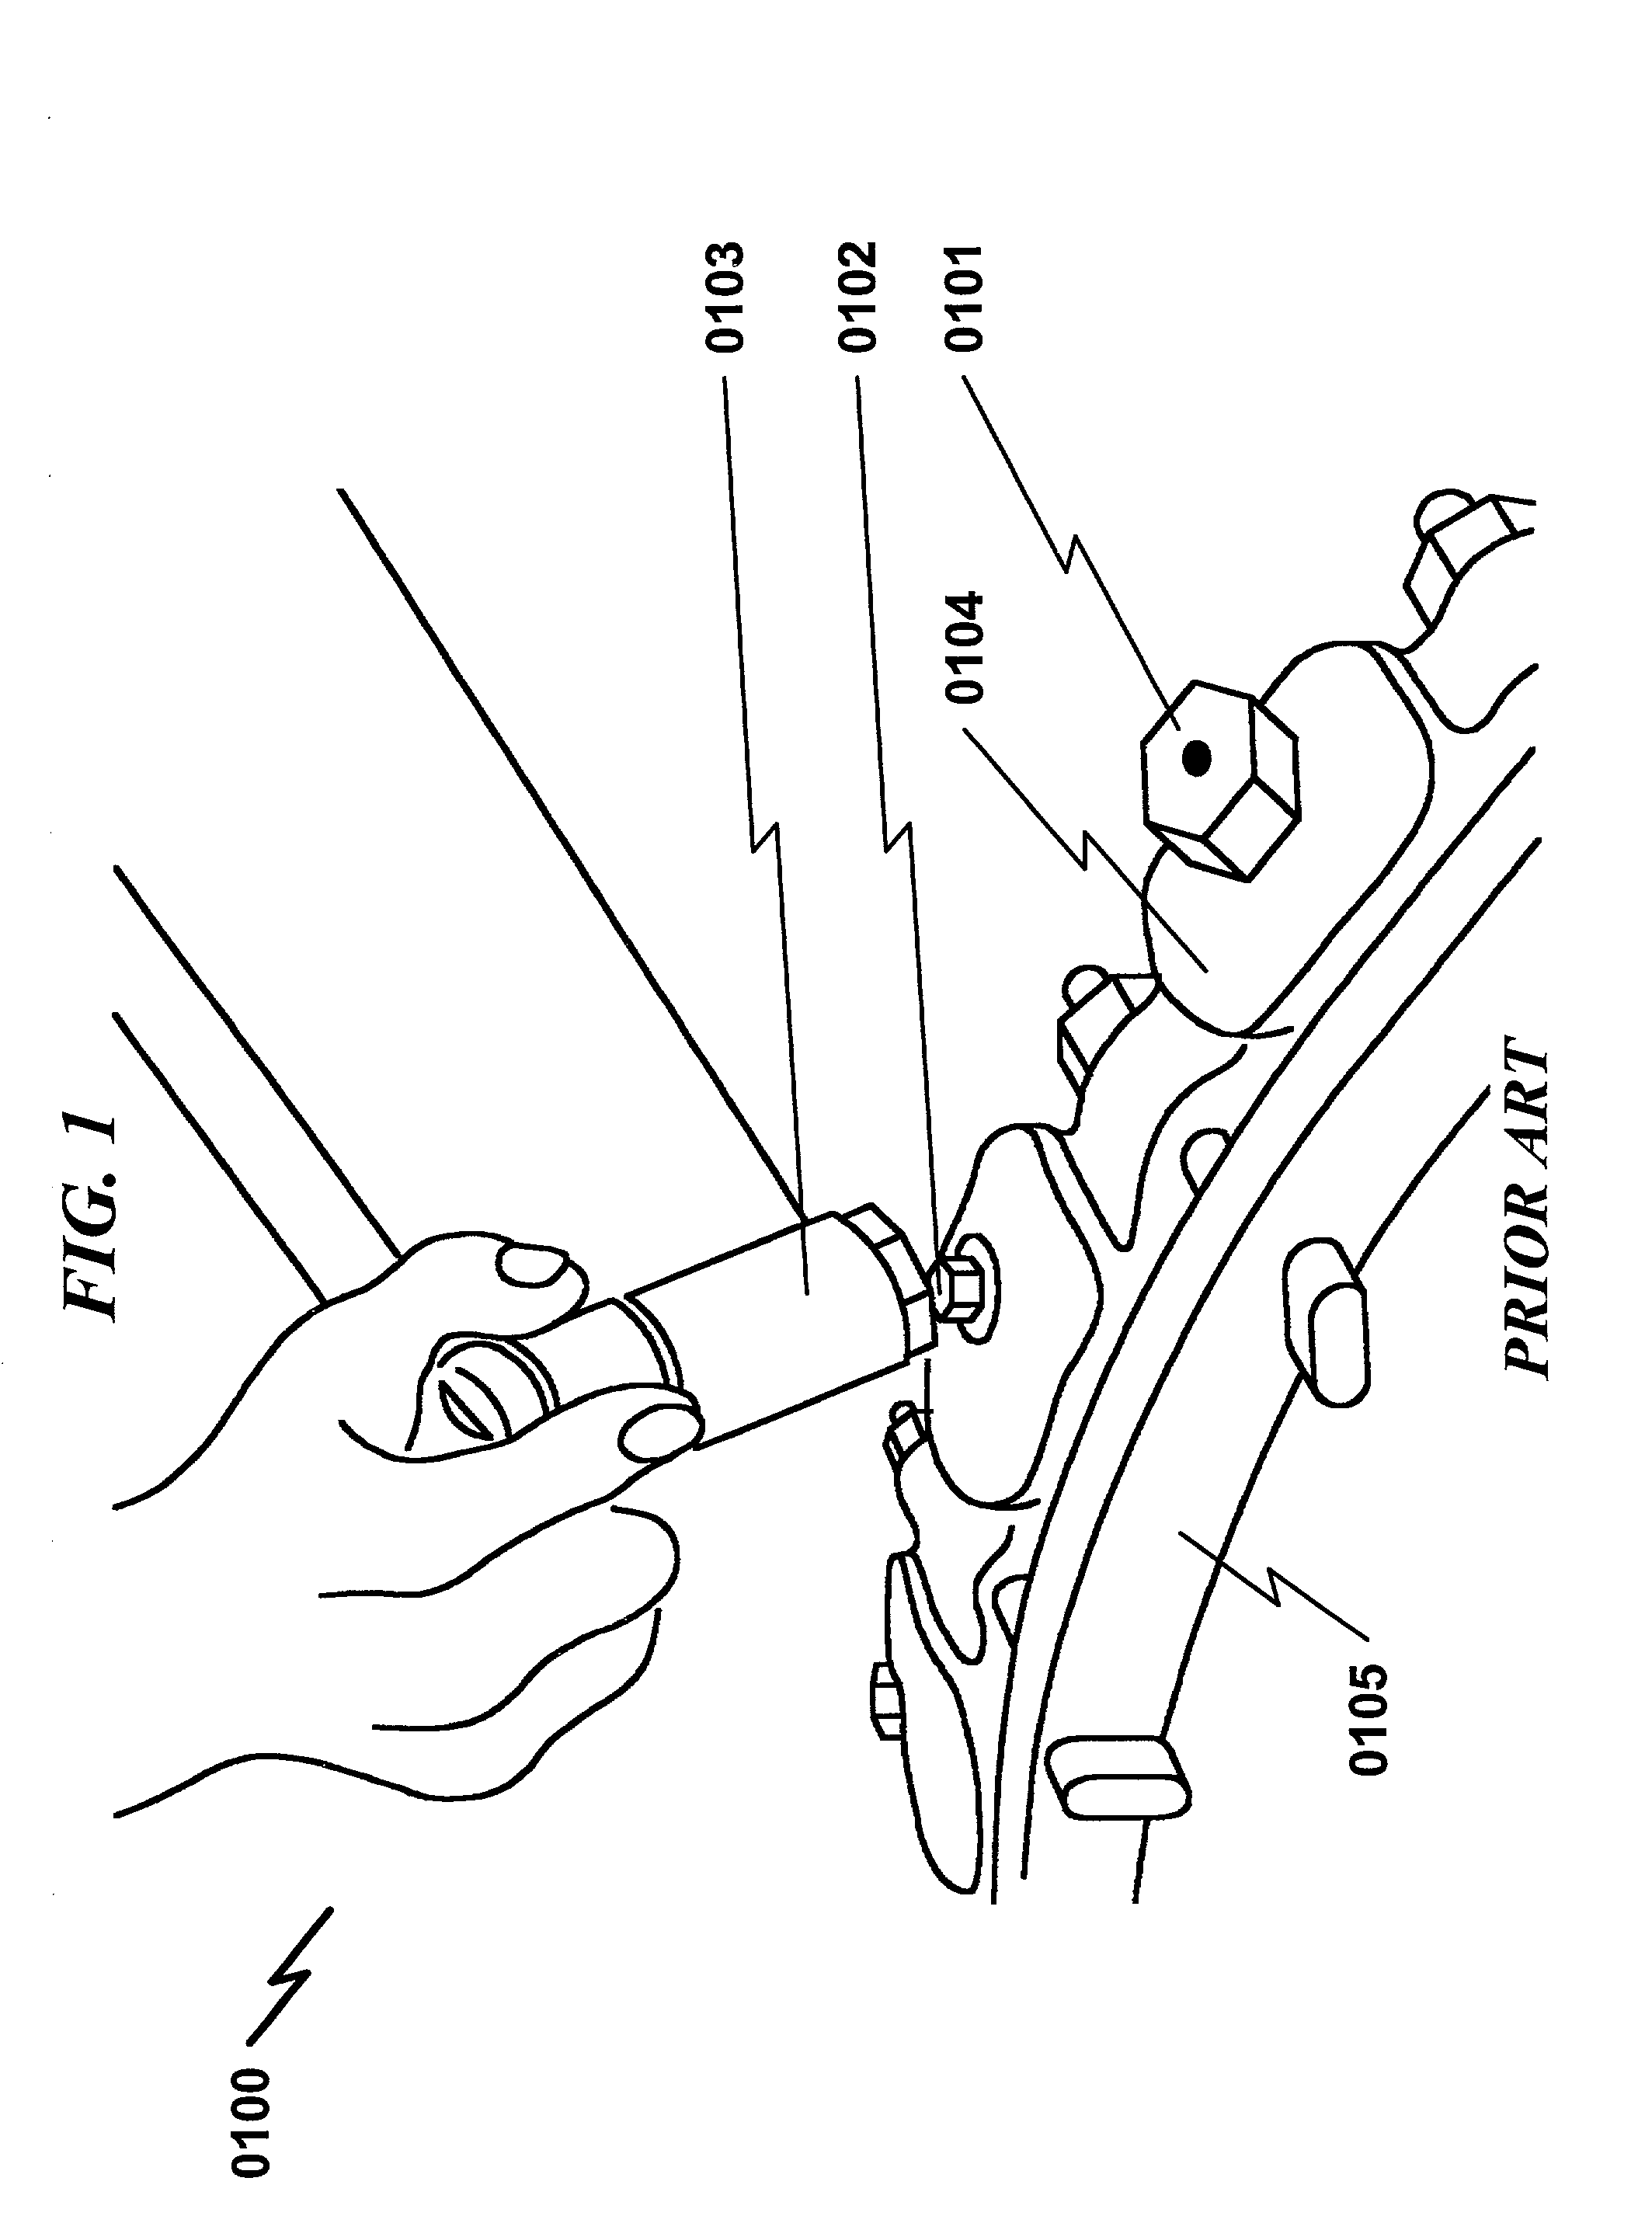 Torque shearing nut system and method